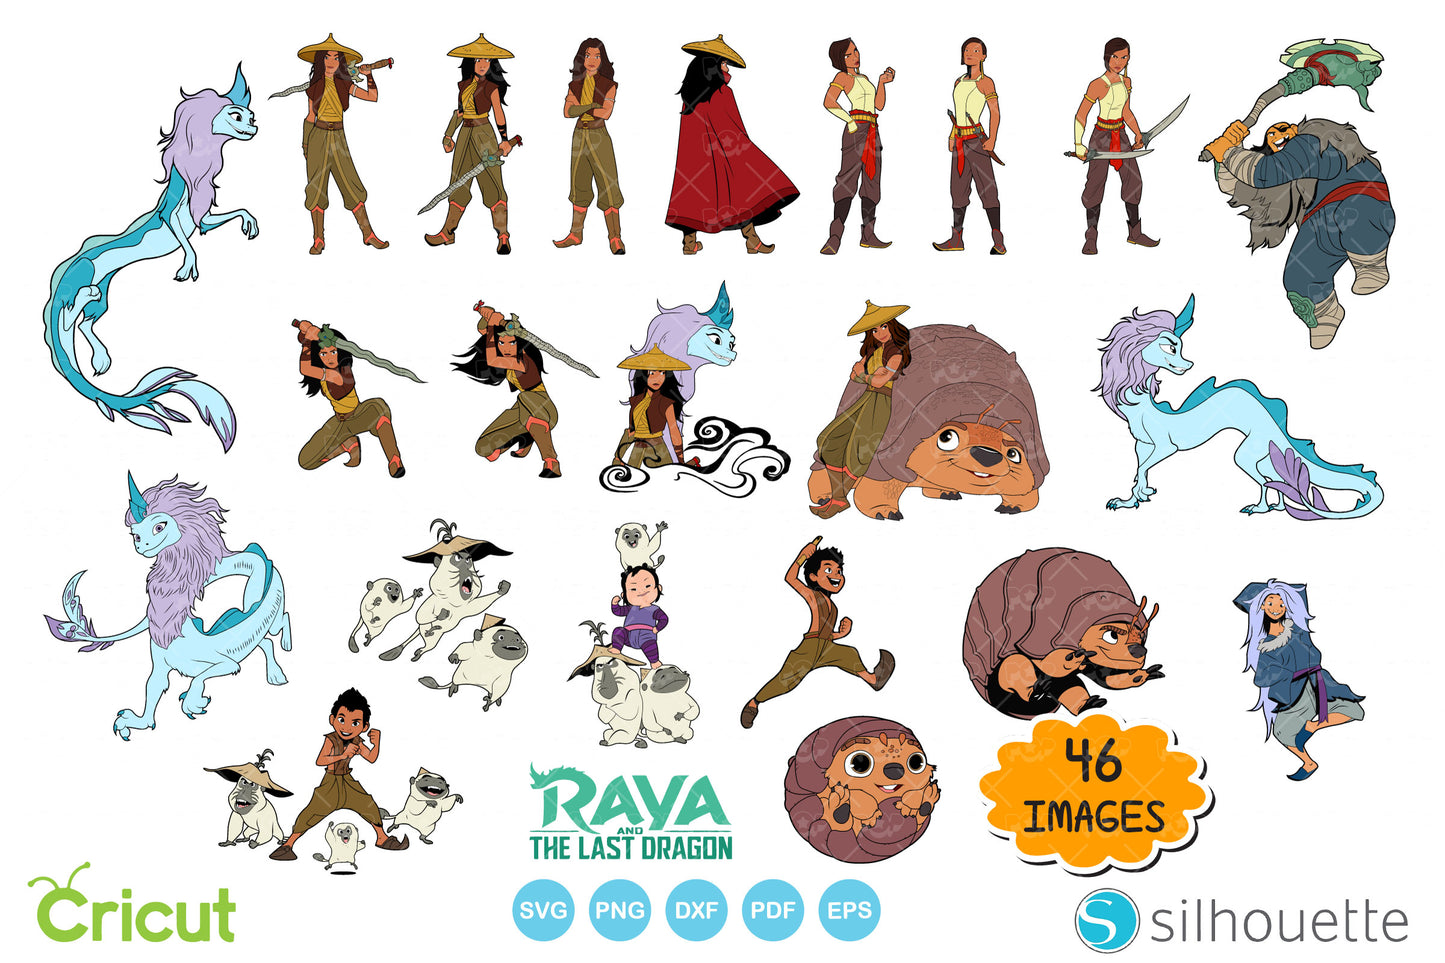 Raya and the Last Dragon clipart bundle, Raya SVG cut files for cricut silhouette, SVG, PNG, DXF, instant download